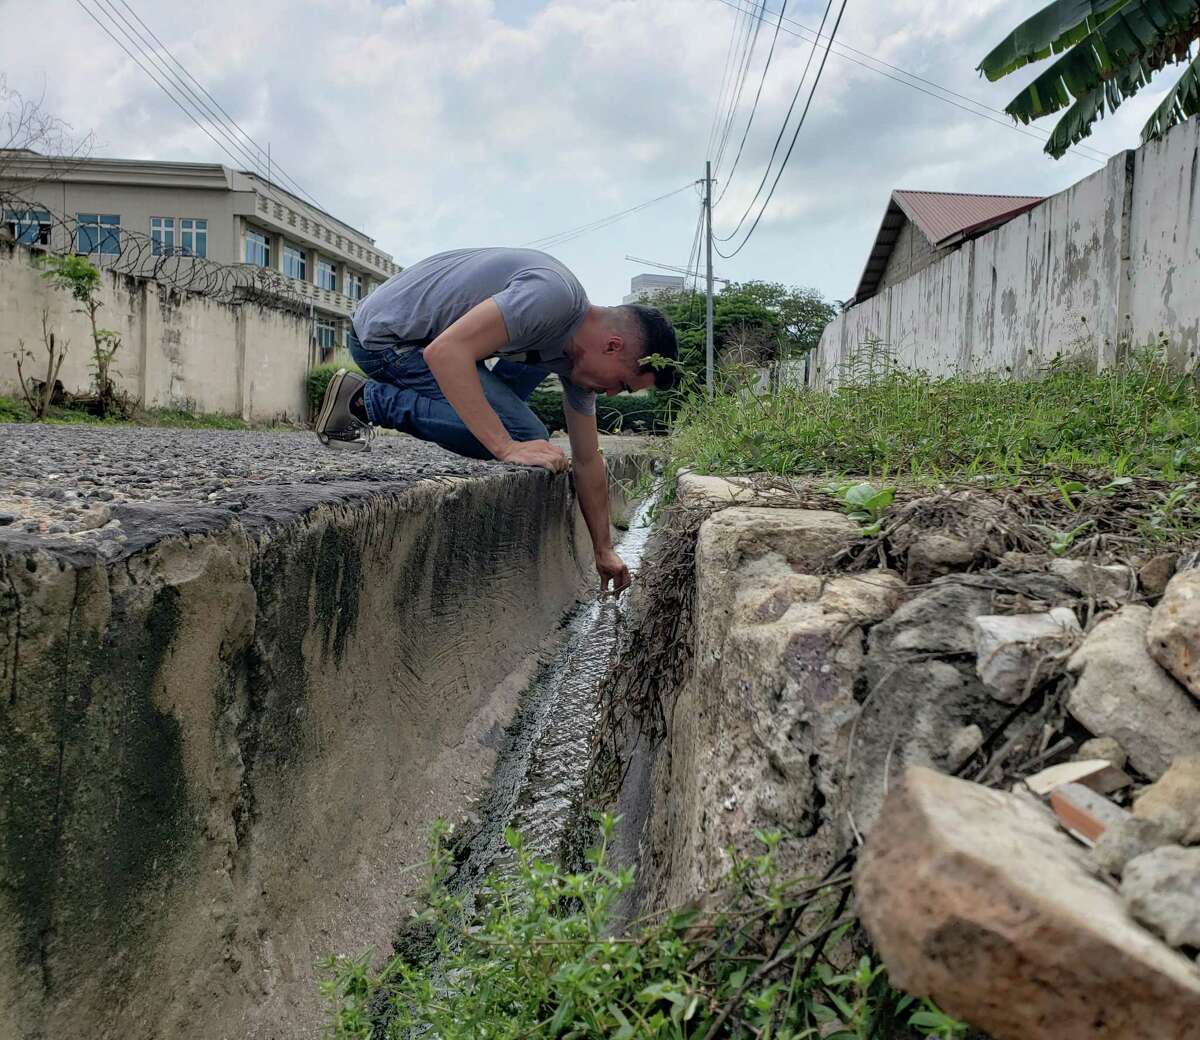 Ben Chan, a research scientist, at Yale University, collects phages, viruses that kill bacteria, in a sewage ditch in Accra, Ghana, last week.